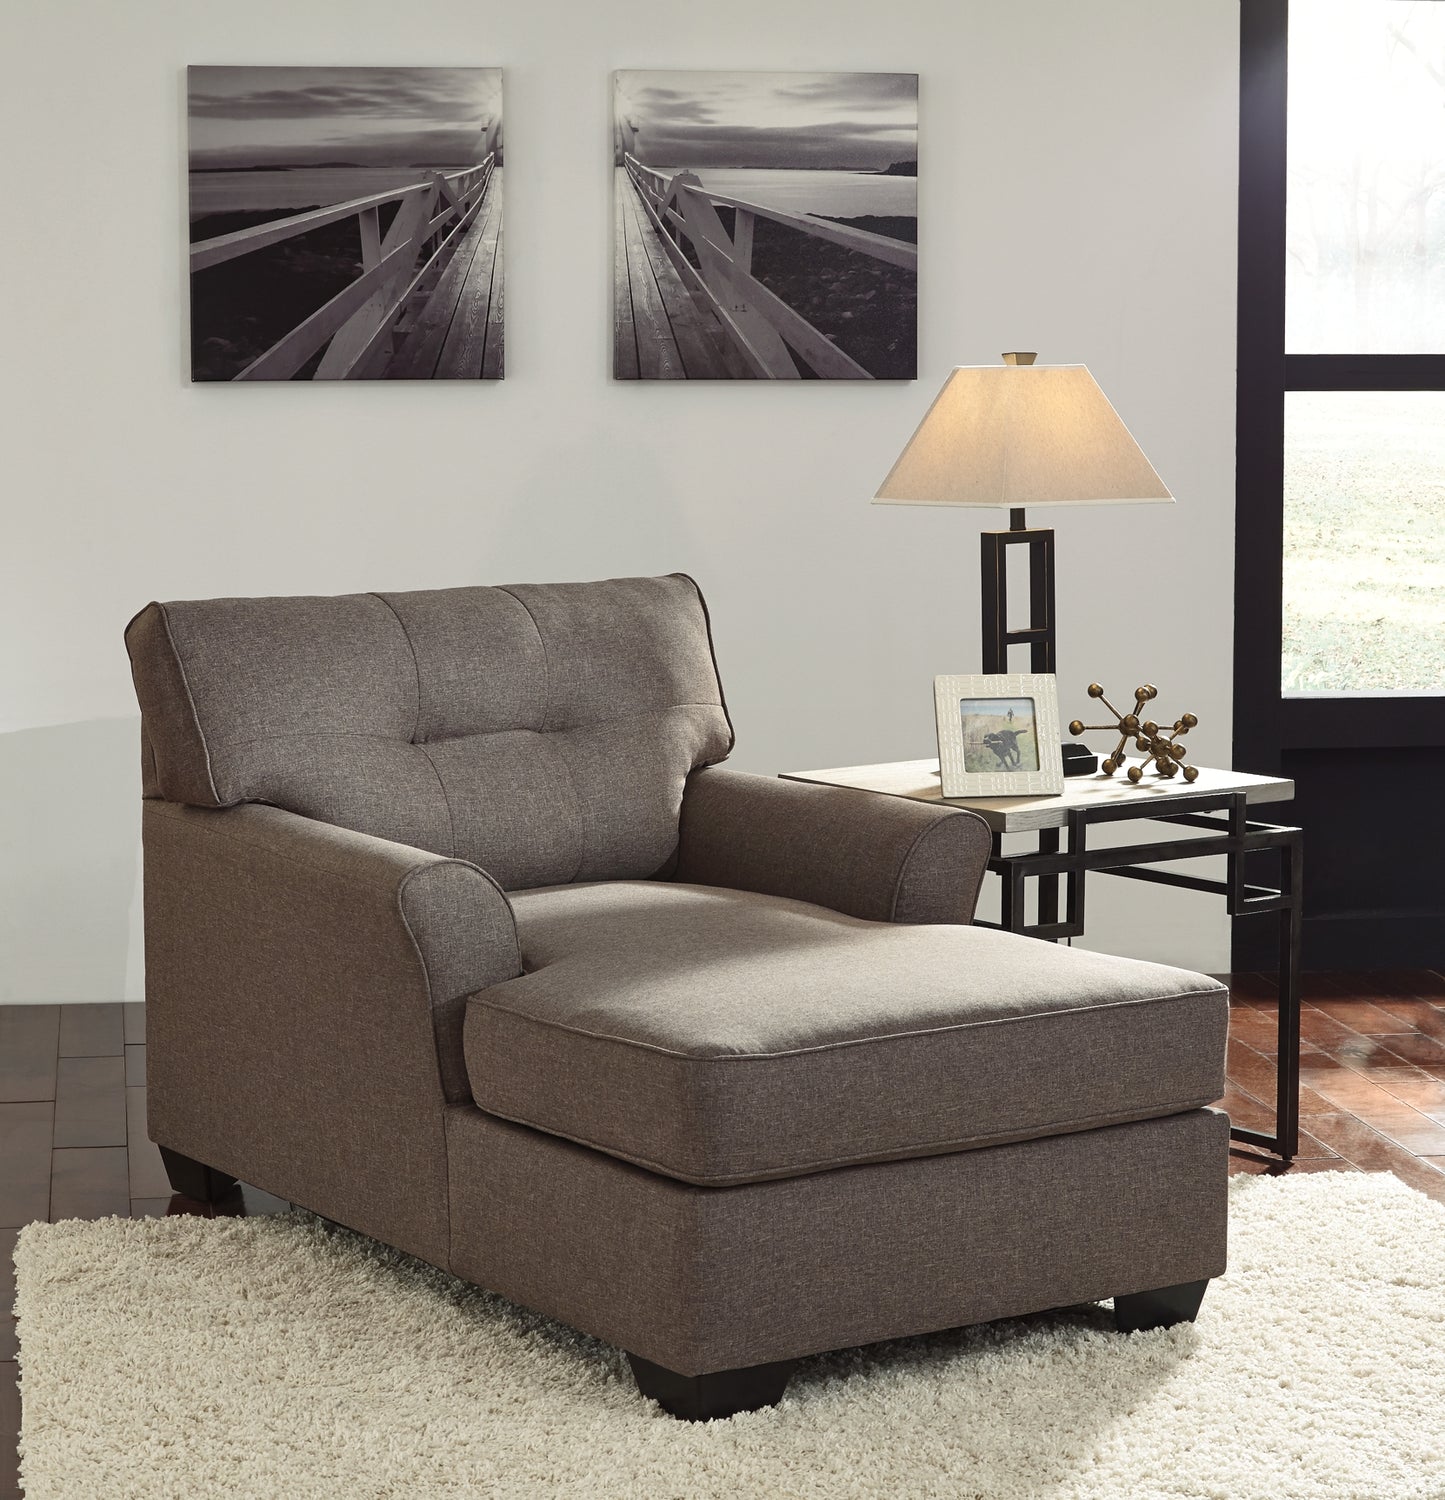 Tibbee Sofa and Chaise